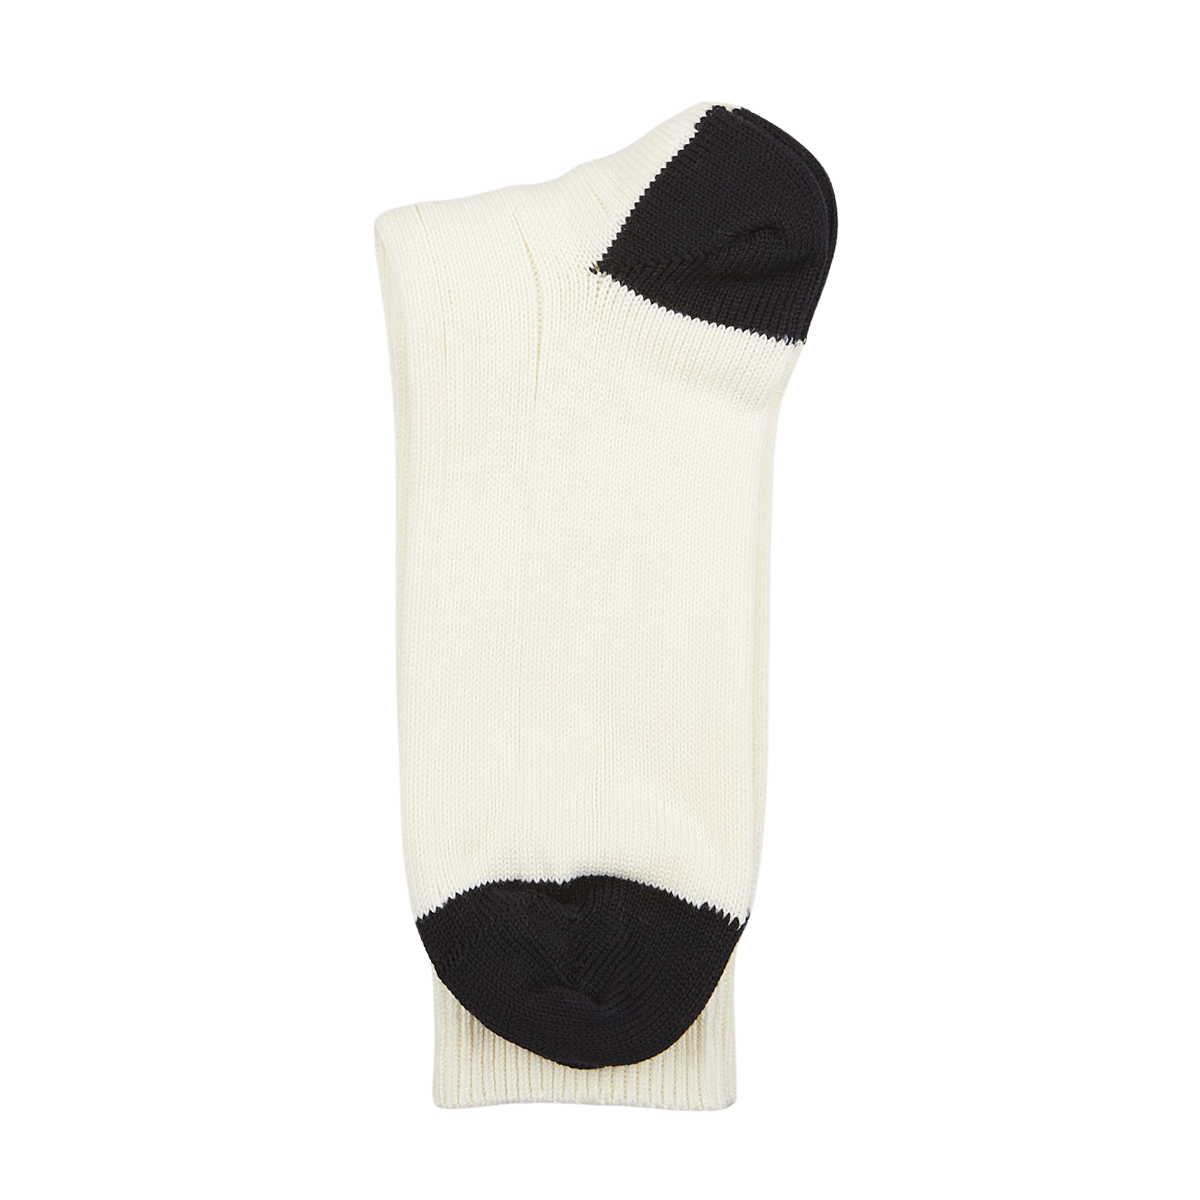 A pair of Cream White Cotton Contrast Cable-Knit Socks by William Lockie, displayed flat against a white background.